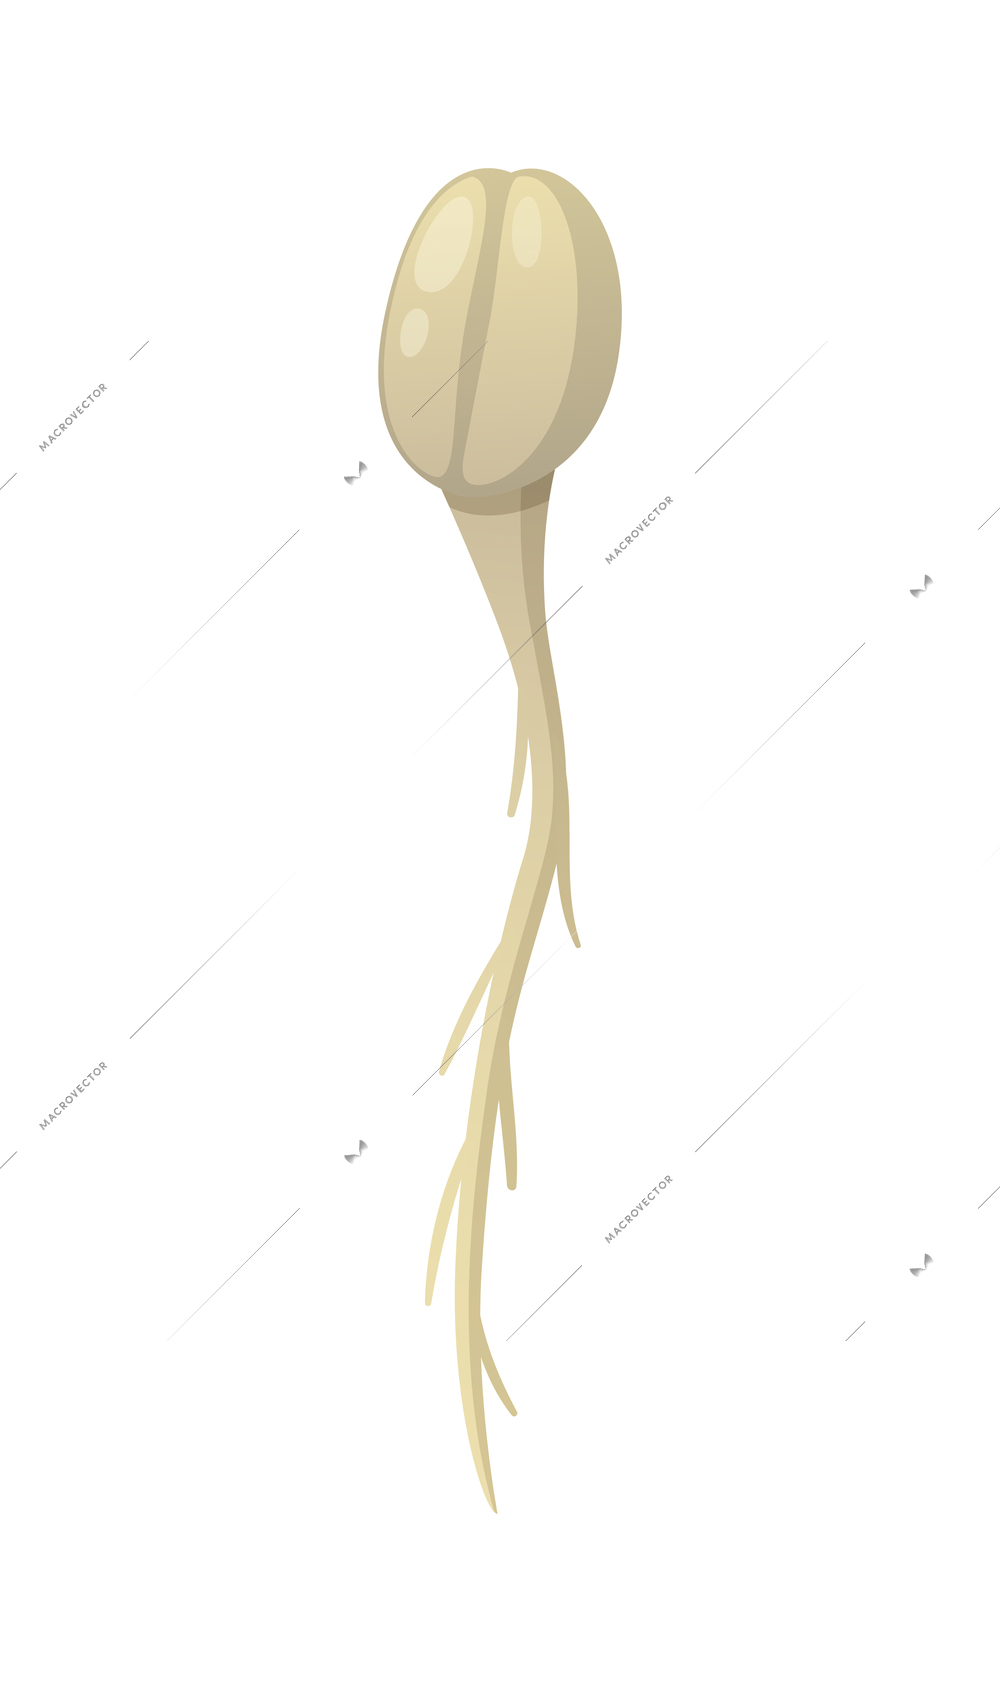 Cartoon sprouting coffee bean on white background vector illustration